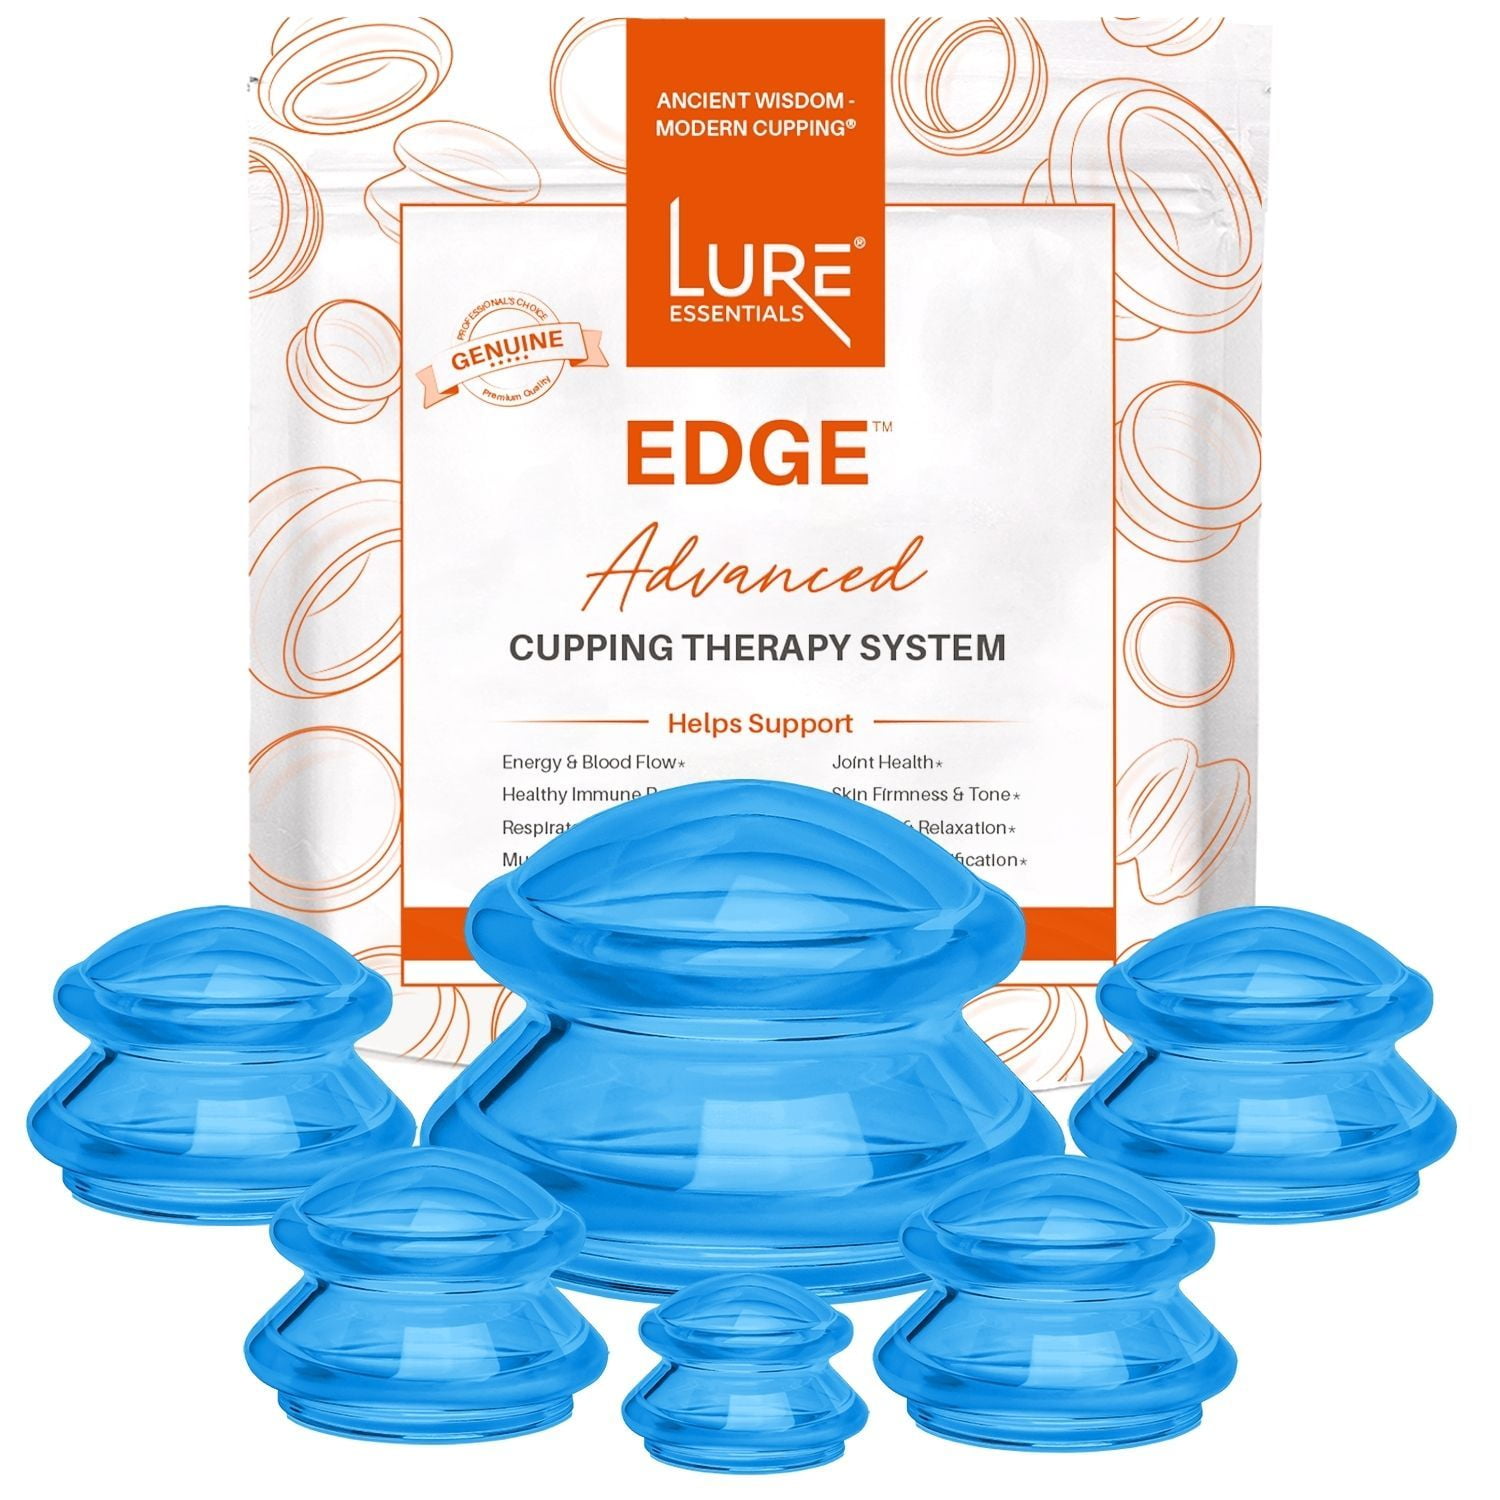 Lure Essentials Edge Cupping Set Ultra Blue Silicone Cupping Therapy Set for Cellulite Reduction and Myofascial Release - Massage Therapists and Home